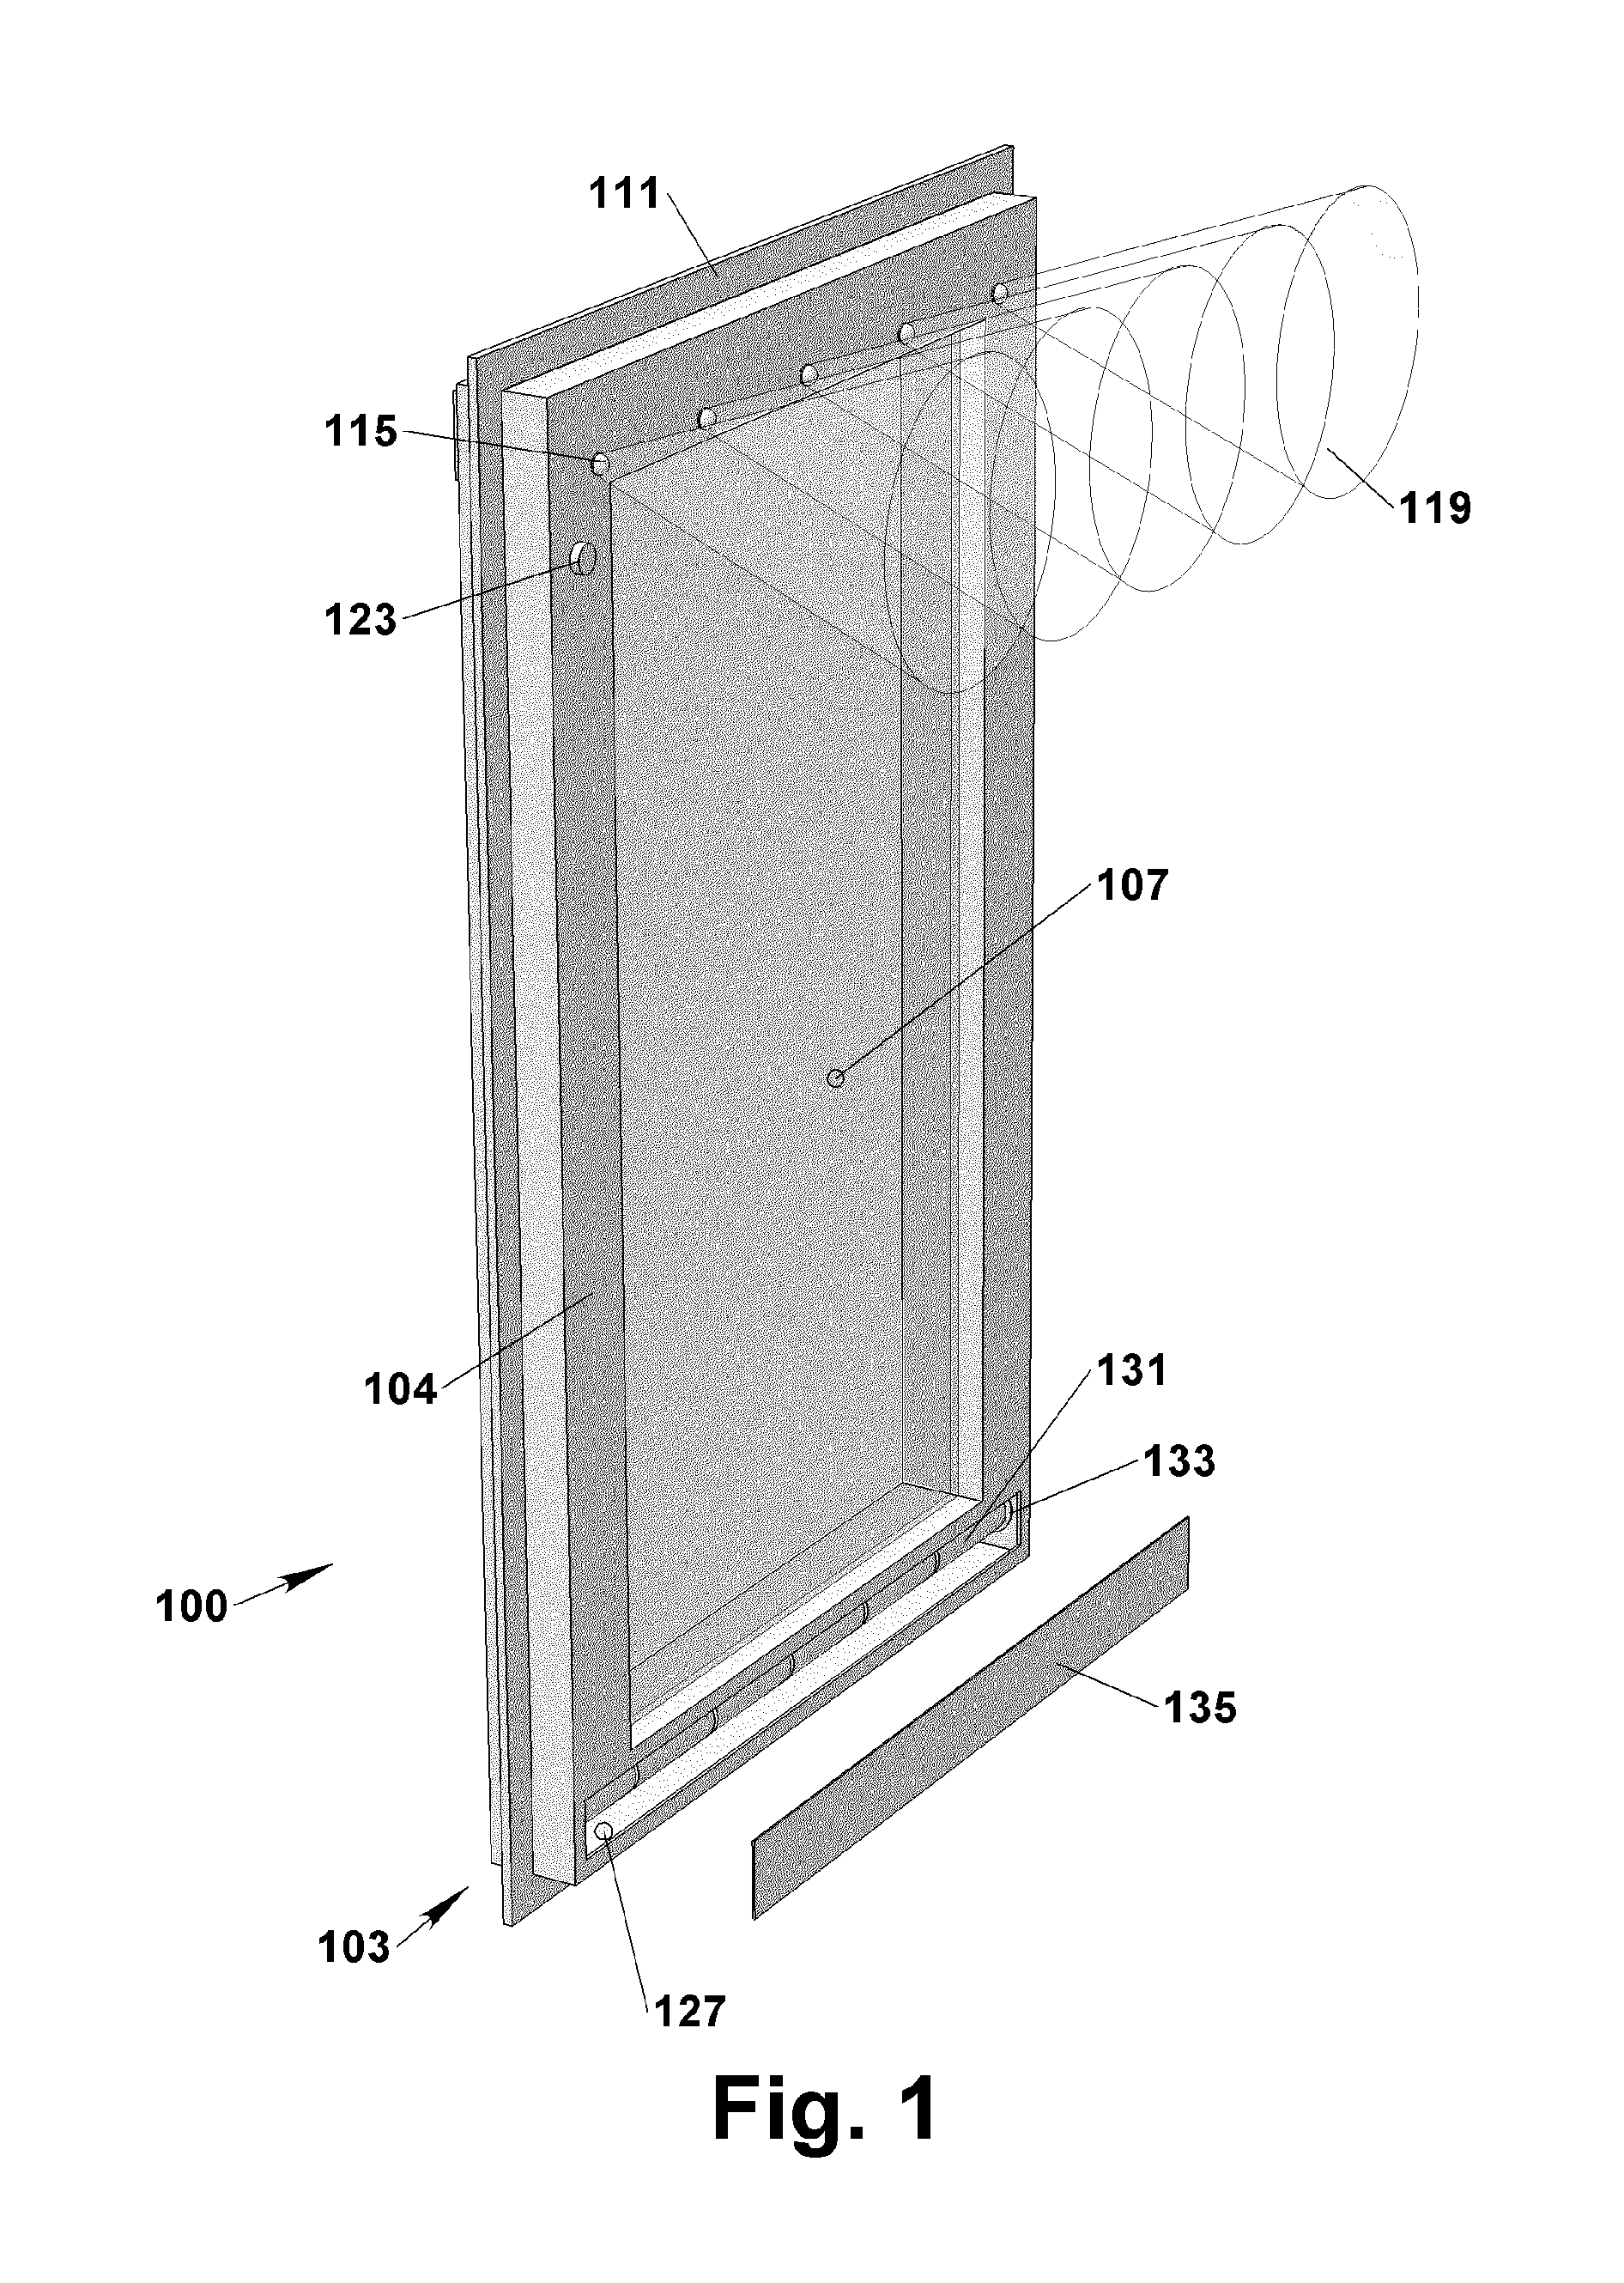 Window frame with integrated solar electric cell and illumination